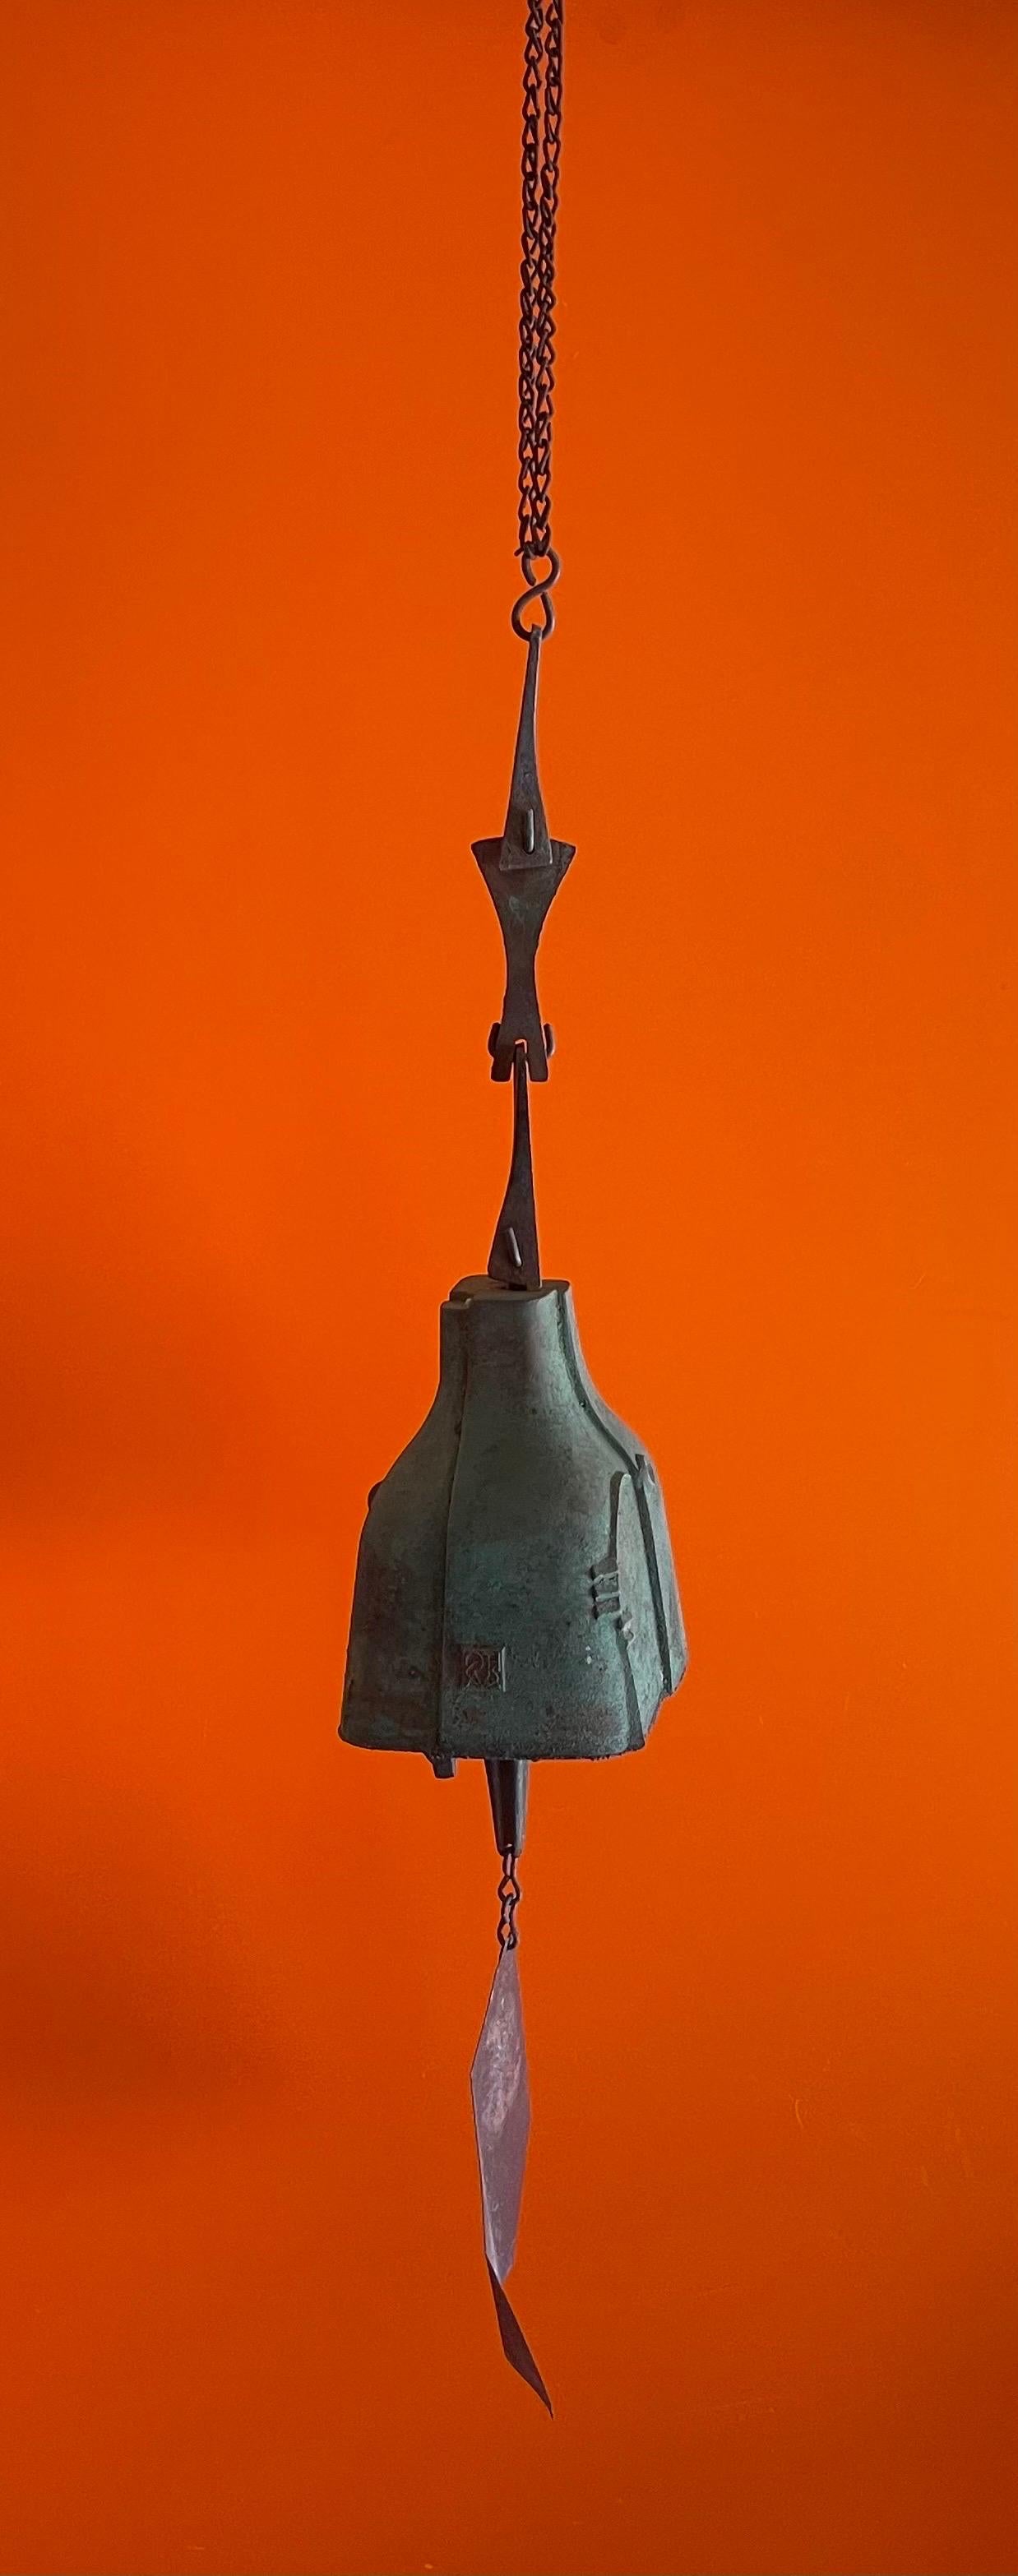 20th Century Large Bronze Wind Chime / Bell by Paolo Soleri for Cosanti